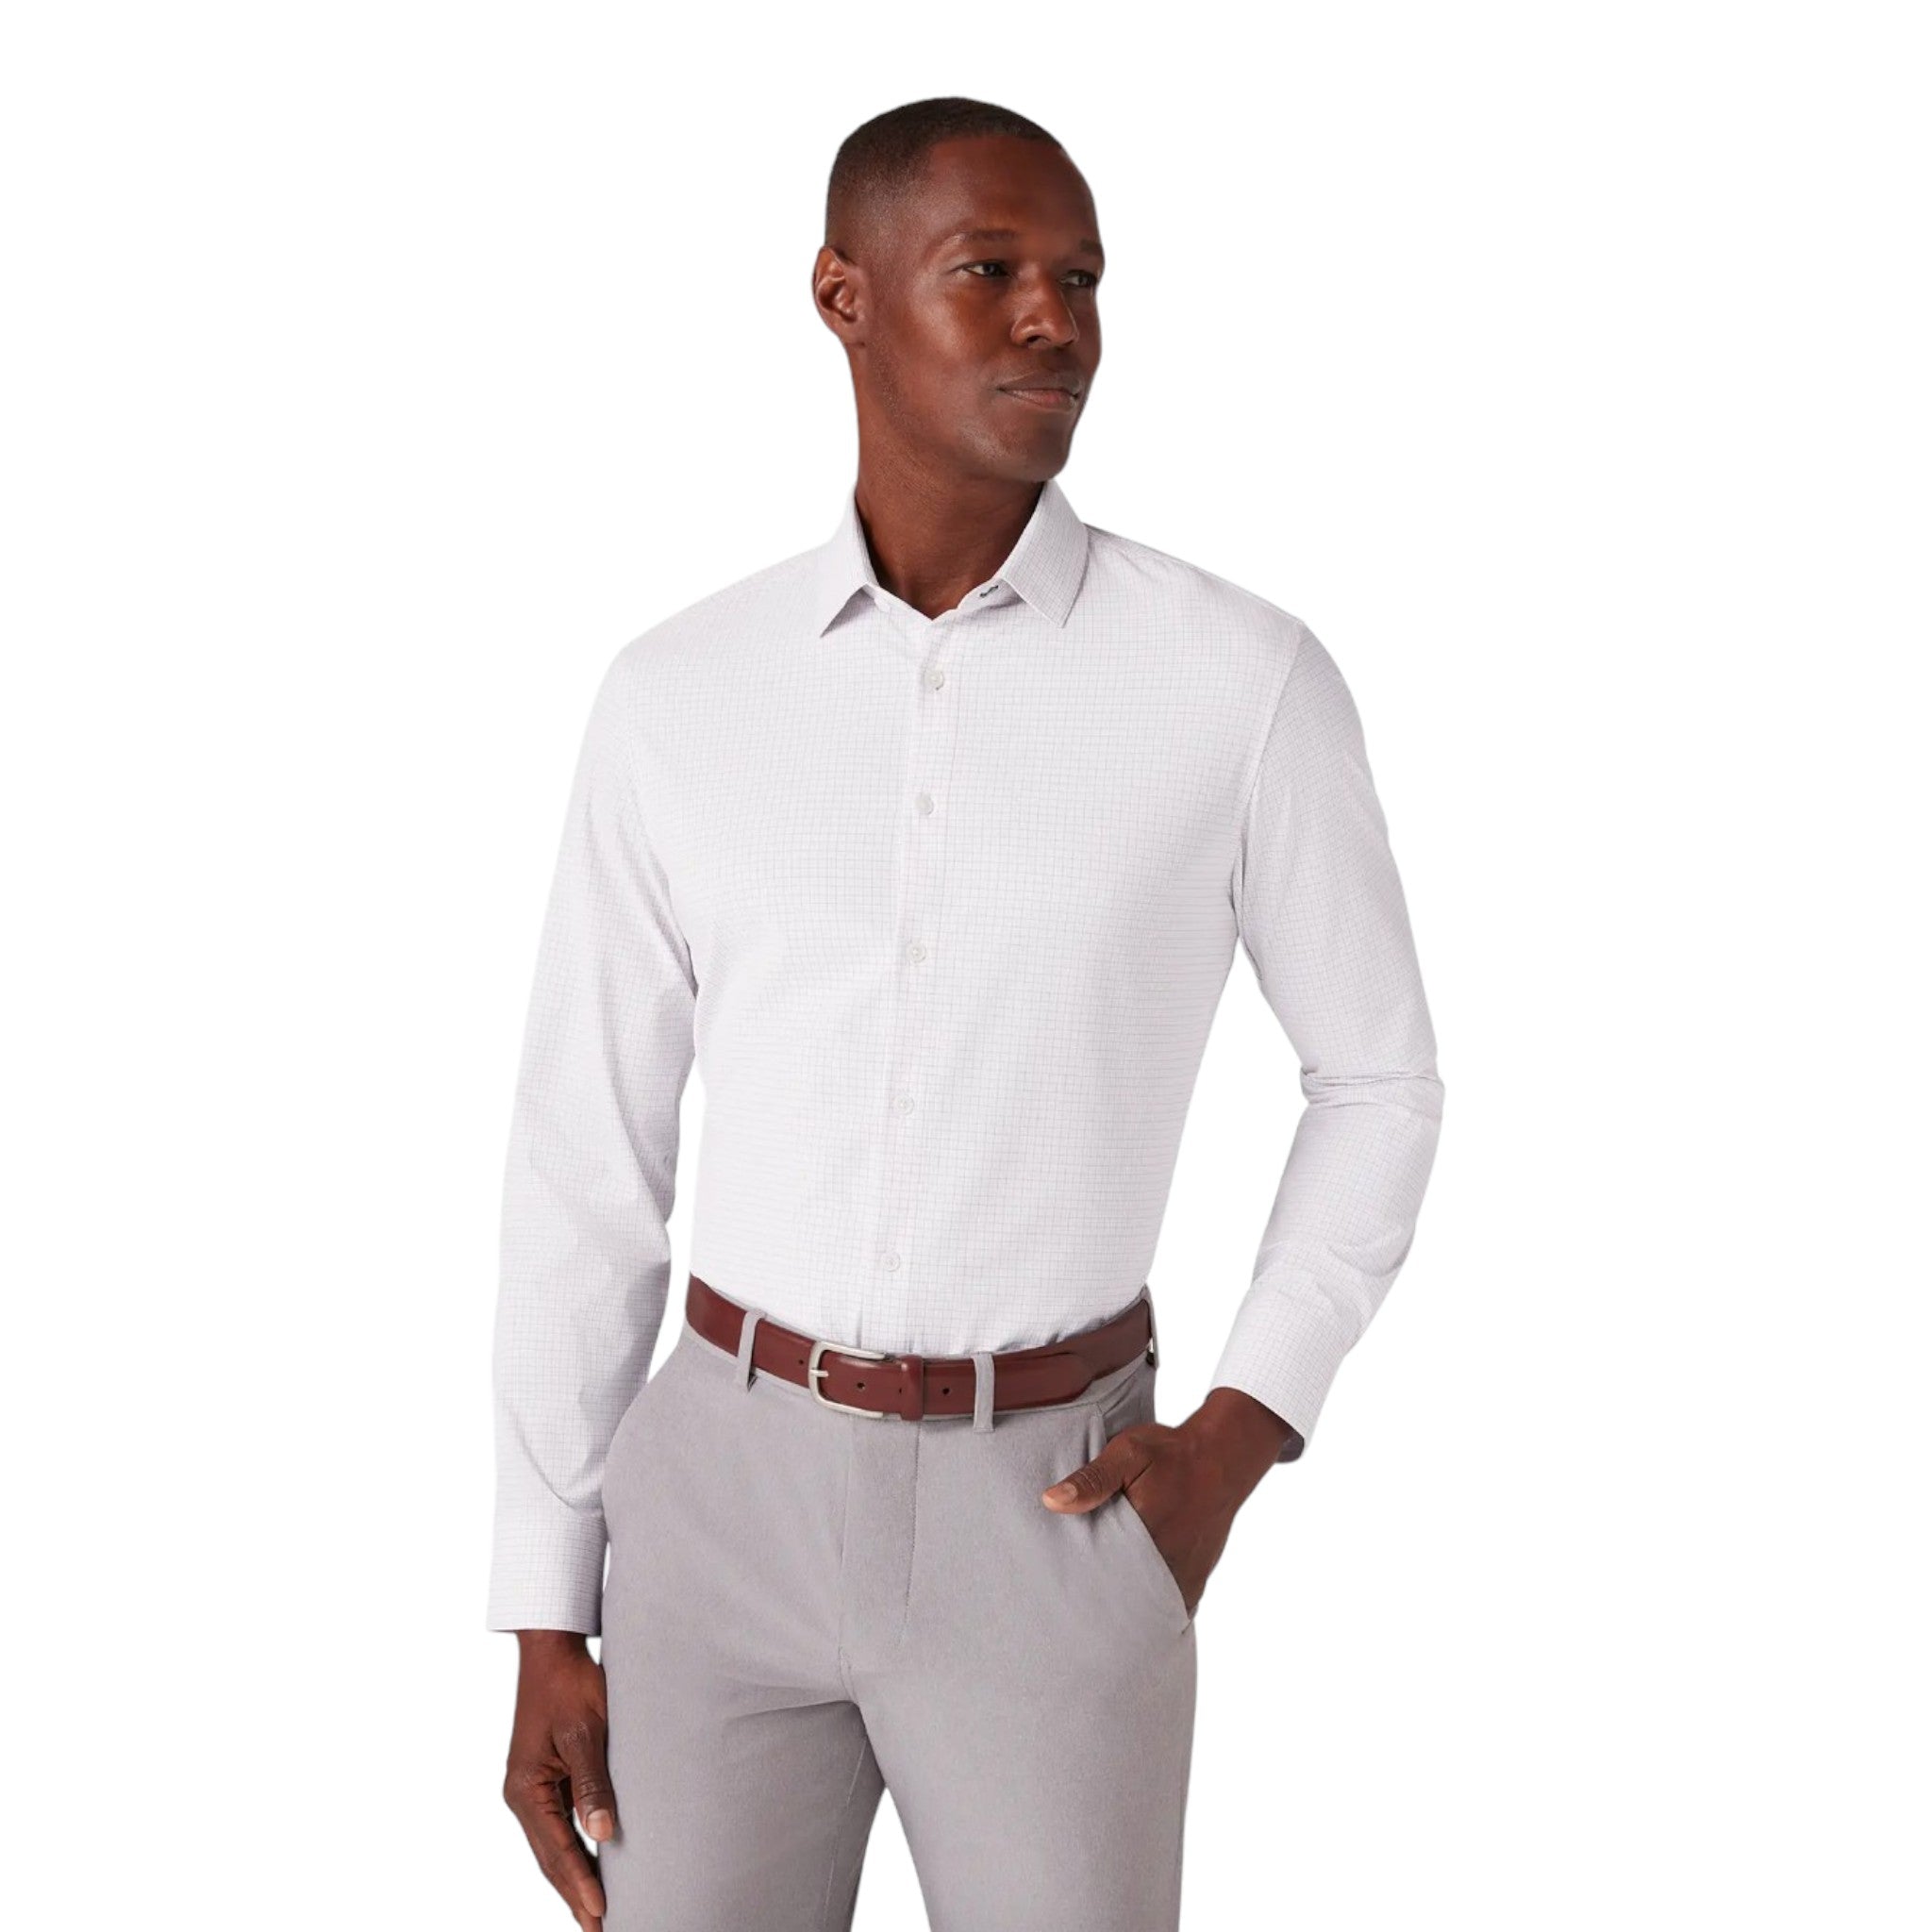 Khaki pants and a white button-up shirt are an iconic menswear combination.  What keeps this look fresh instea… | Mens outfits, Pants outfit men, Mens  fashion casual